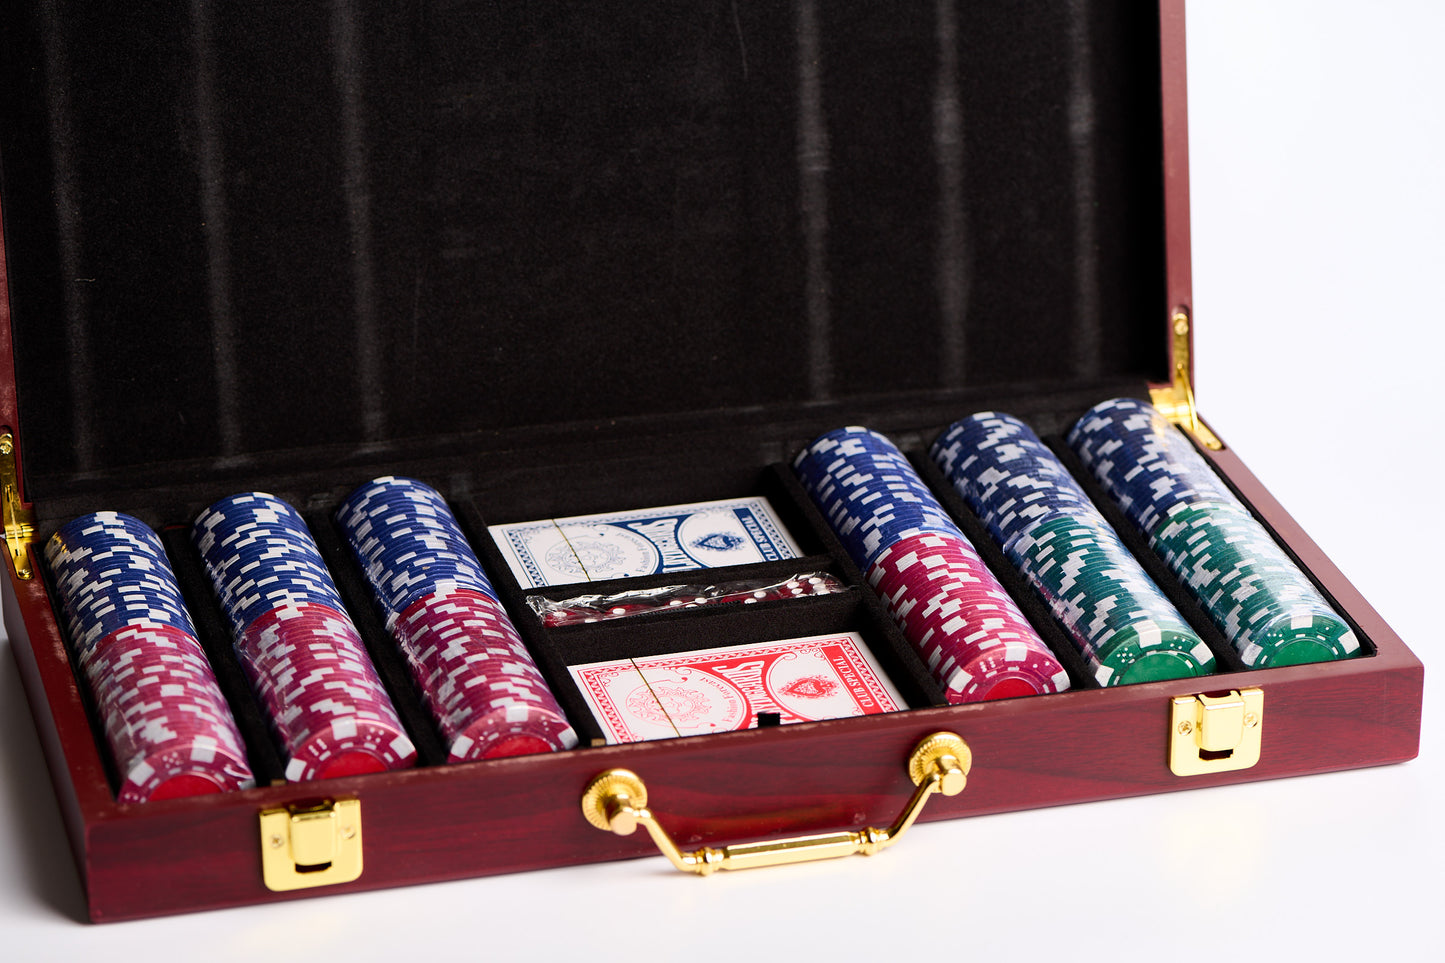 300-chip poker set with rosewood finish